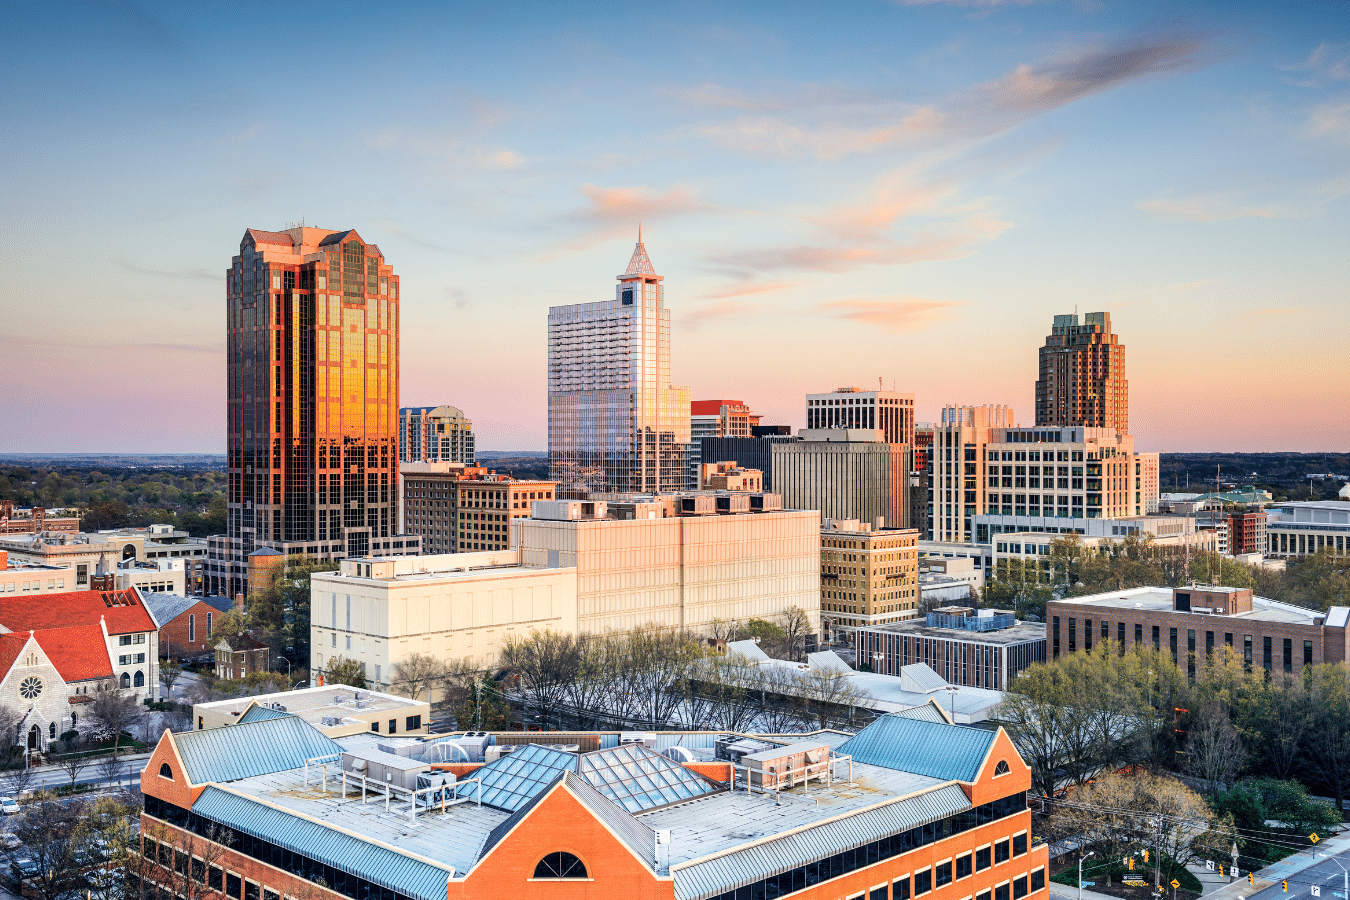 A photo of the downtown Raleigh skyline at sunset